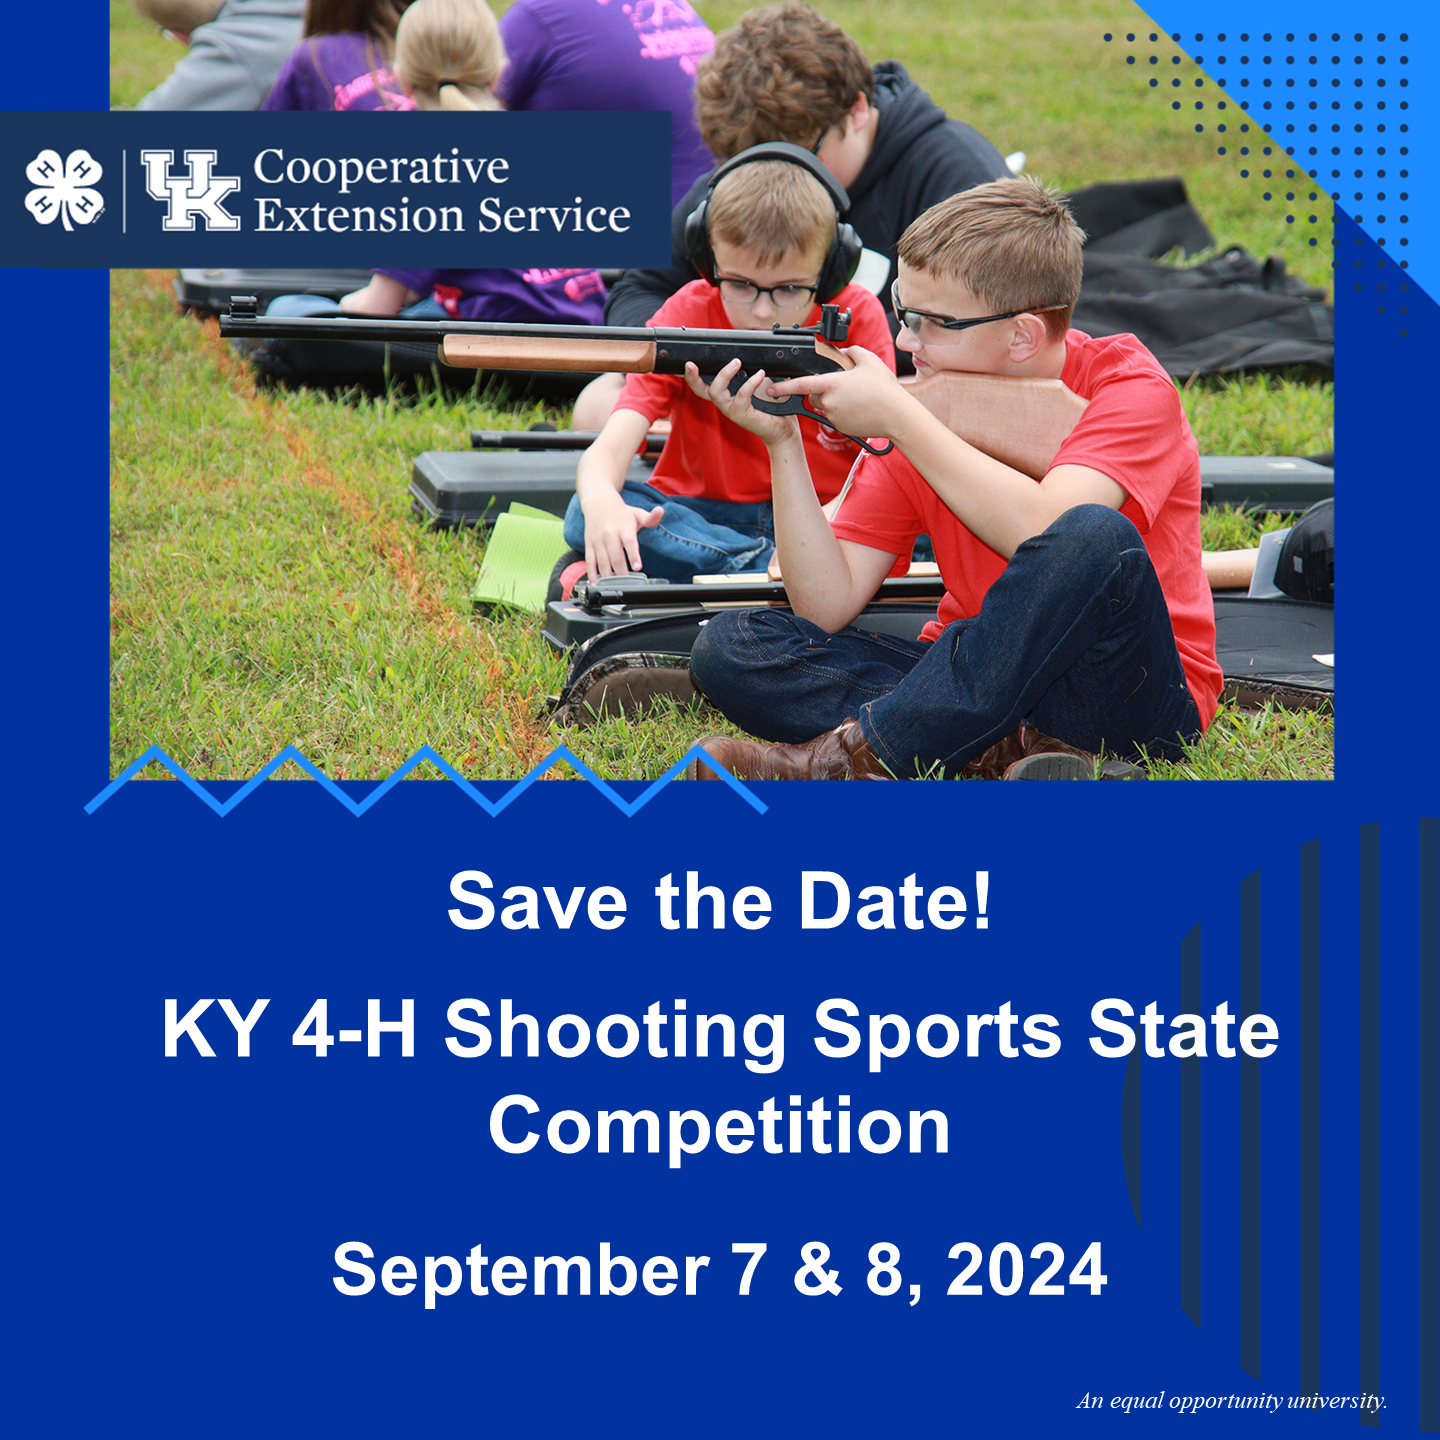 Save the date for KY 4-H Shooting Sports State Competition